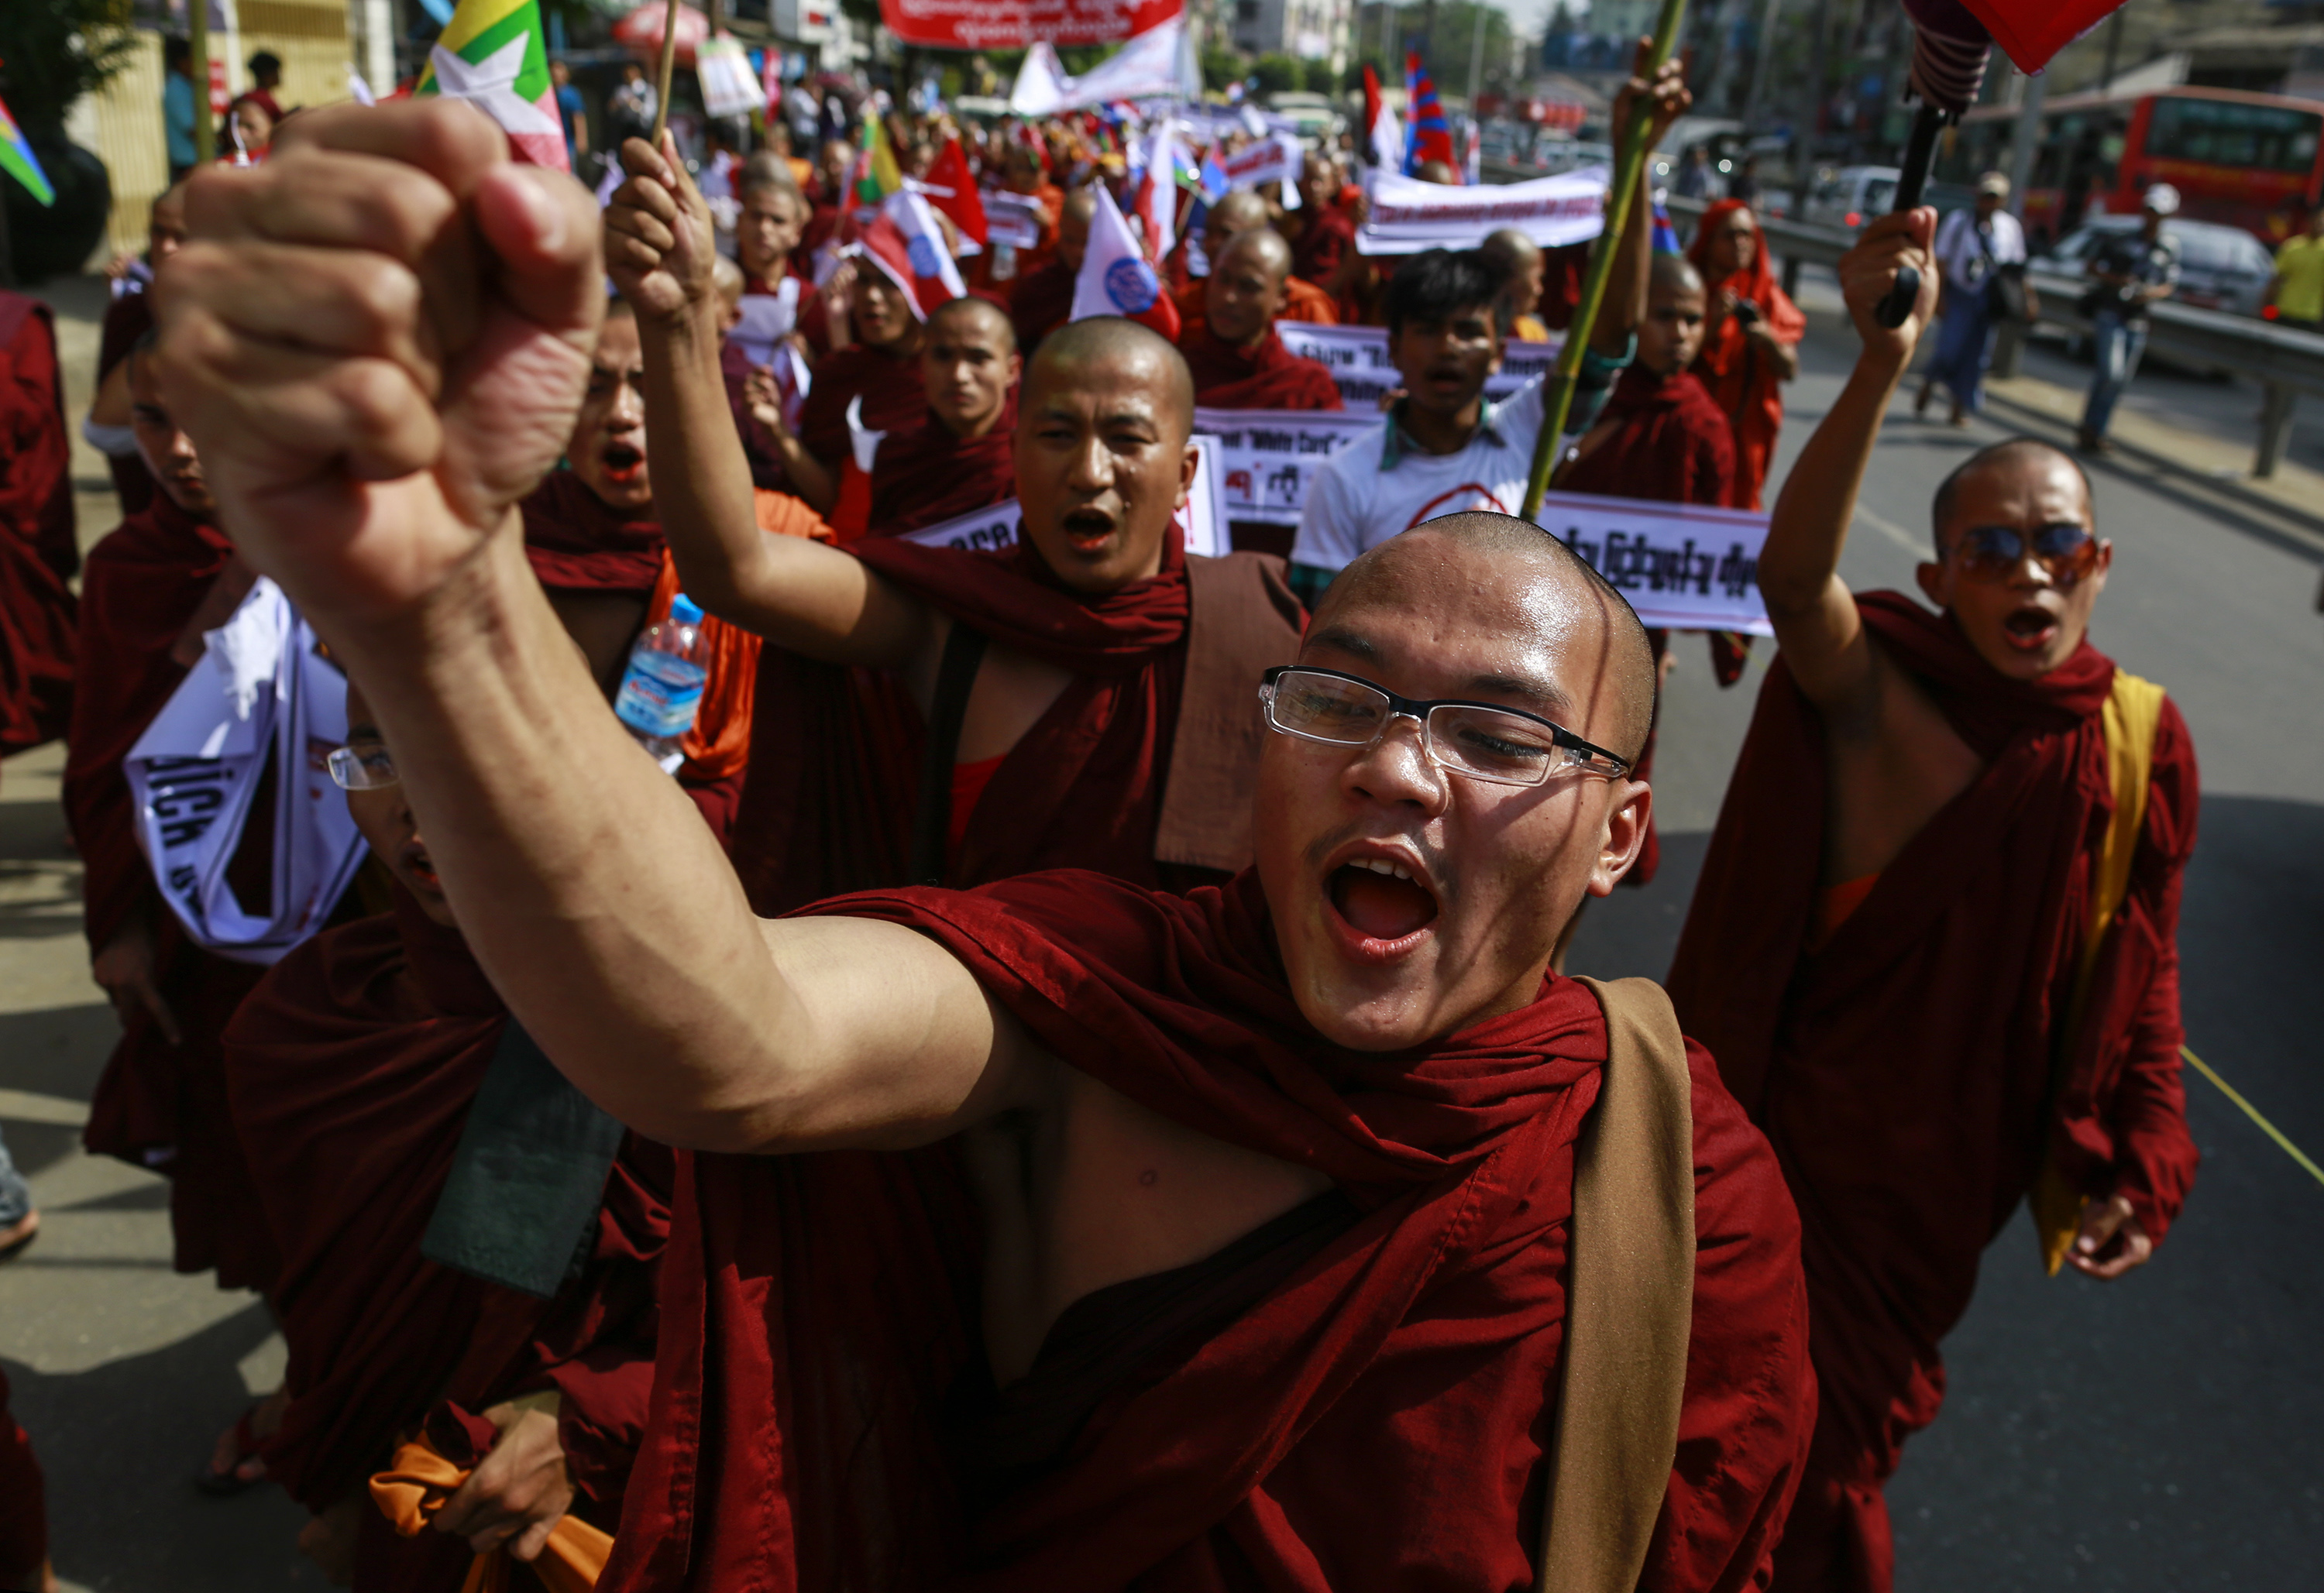 Buddhist monks and other people take part in a protest to demand the revocation of the right of holders of temporary identification cards, known as white cards, to vote, in Yangon